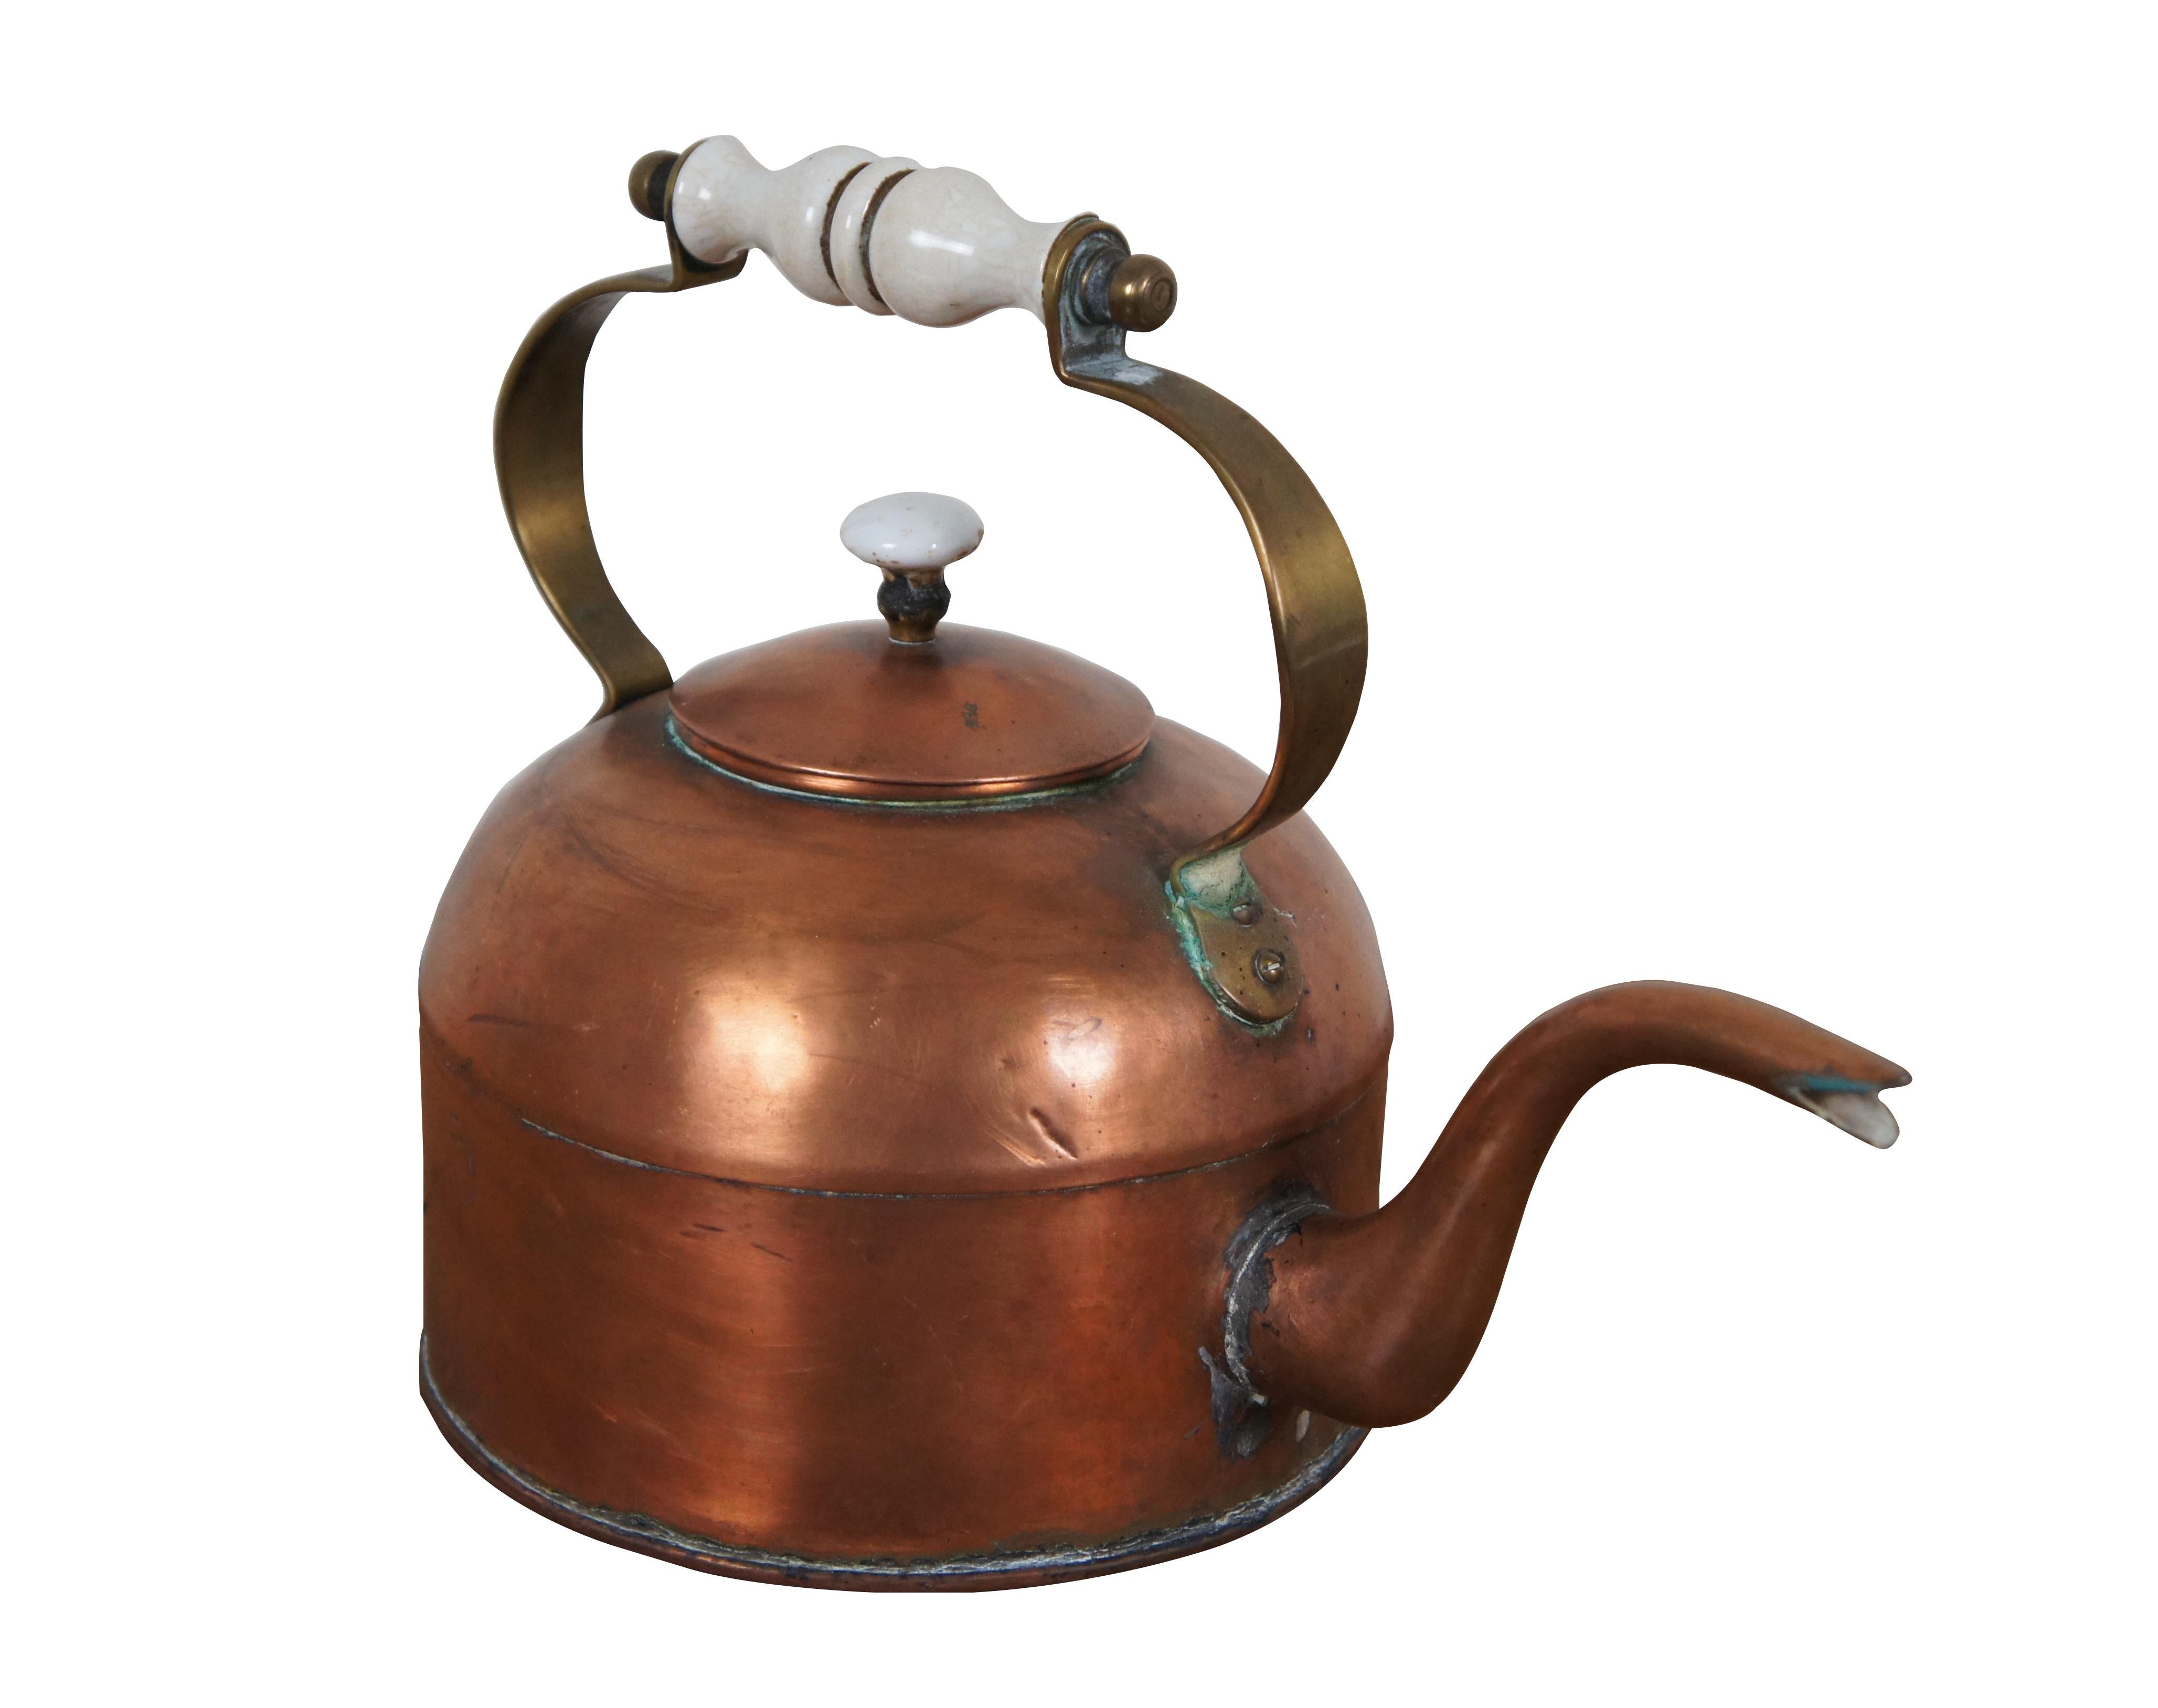 Late 18th century George III copper tea / water / coffee kettle with right angle gooseneck / bird spout, fixed brass handle with turned ceramic / porcelain grip and mushroom shaped porcelain finial on the lid.

Dimensions:
12.25